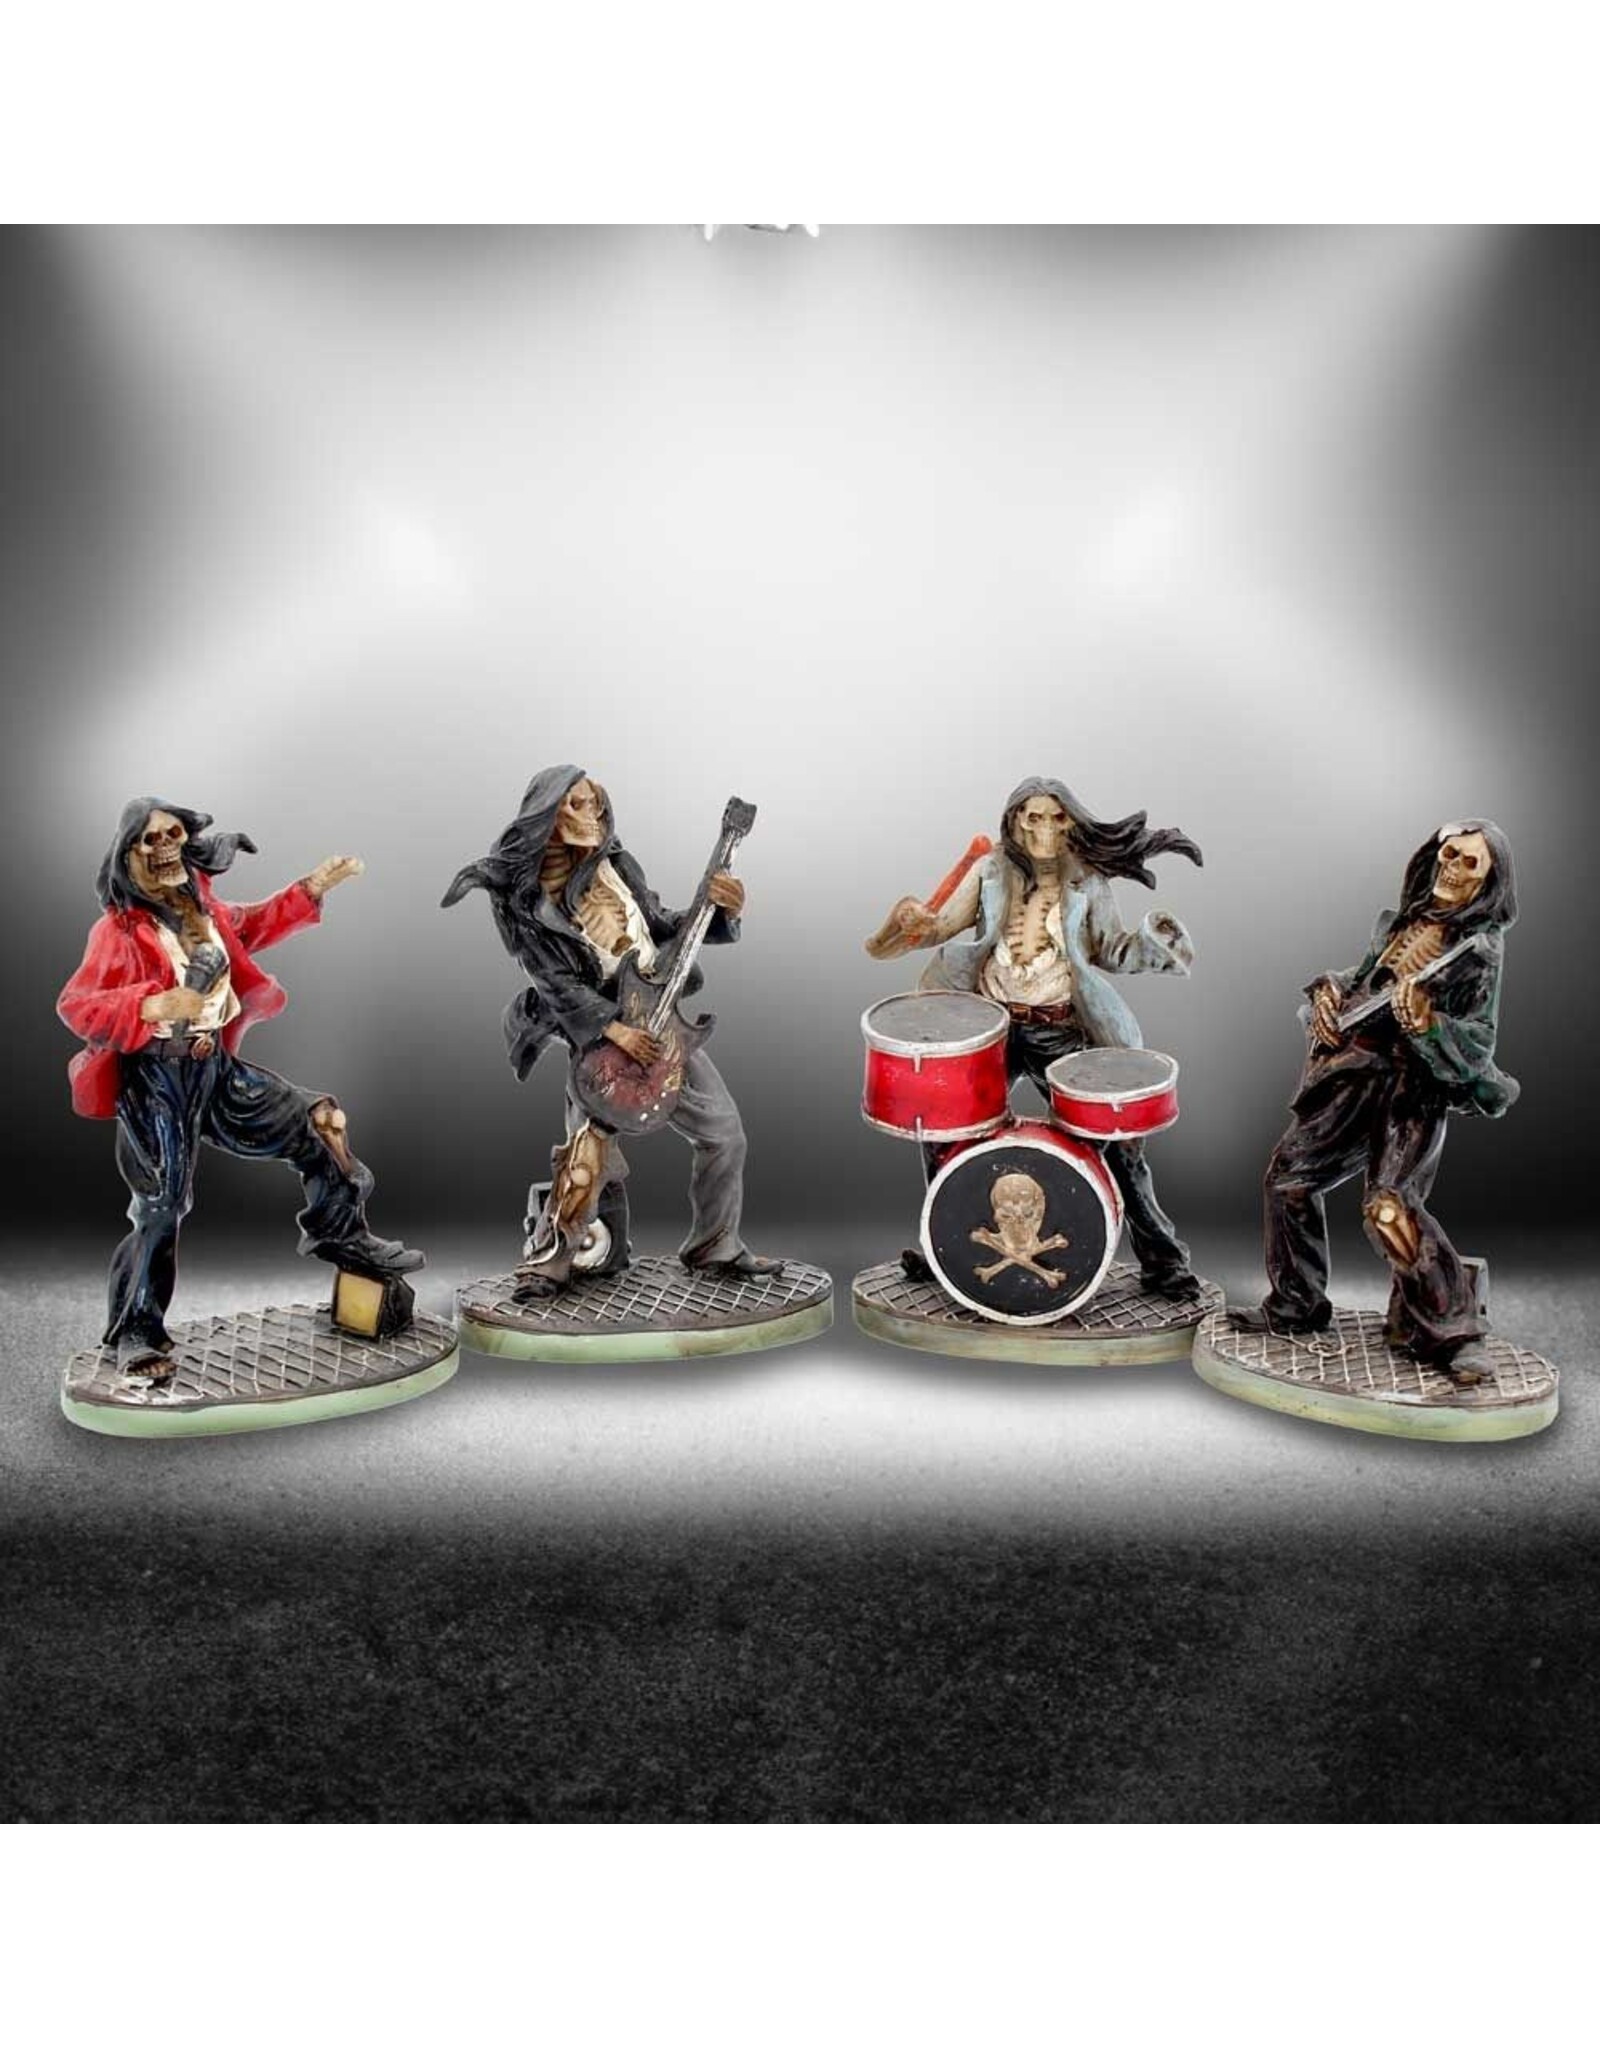 NemesisNow Collectables - One Hell of a Band - Rock band set of 4 figurines Nemesis Now